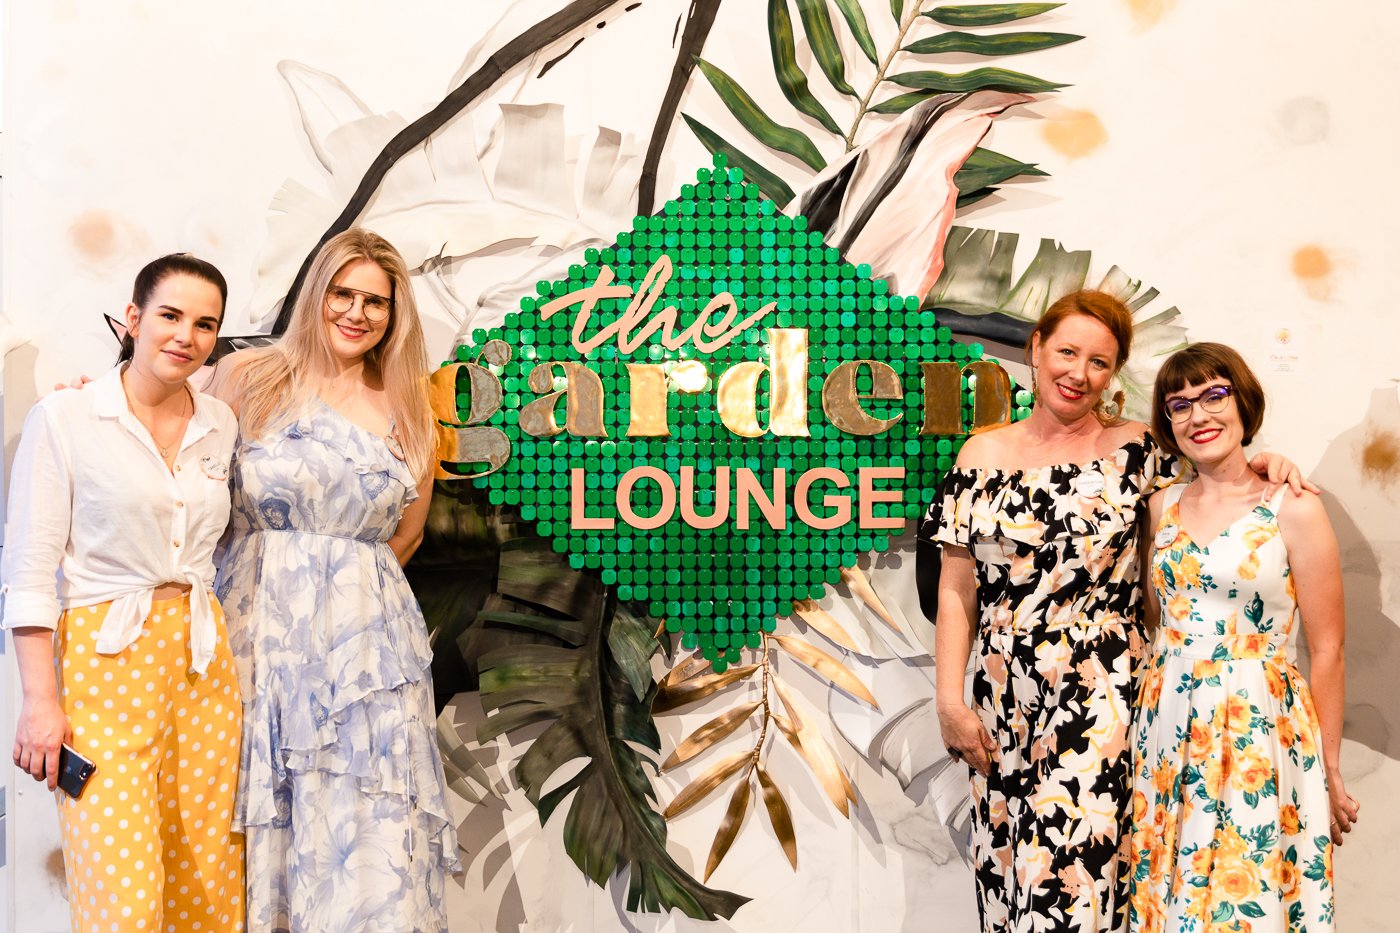 The Garden Lounge launch party